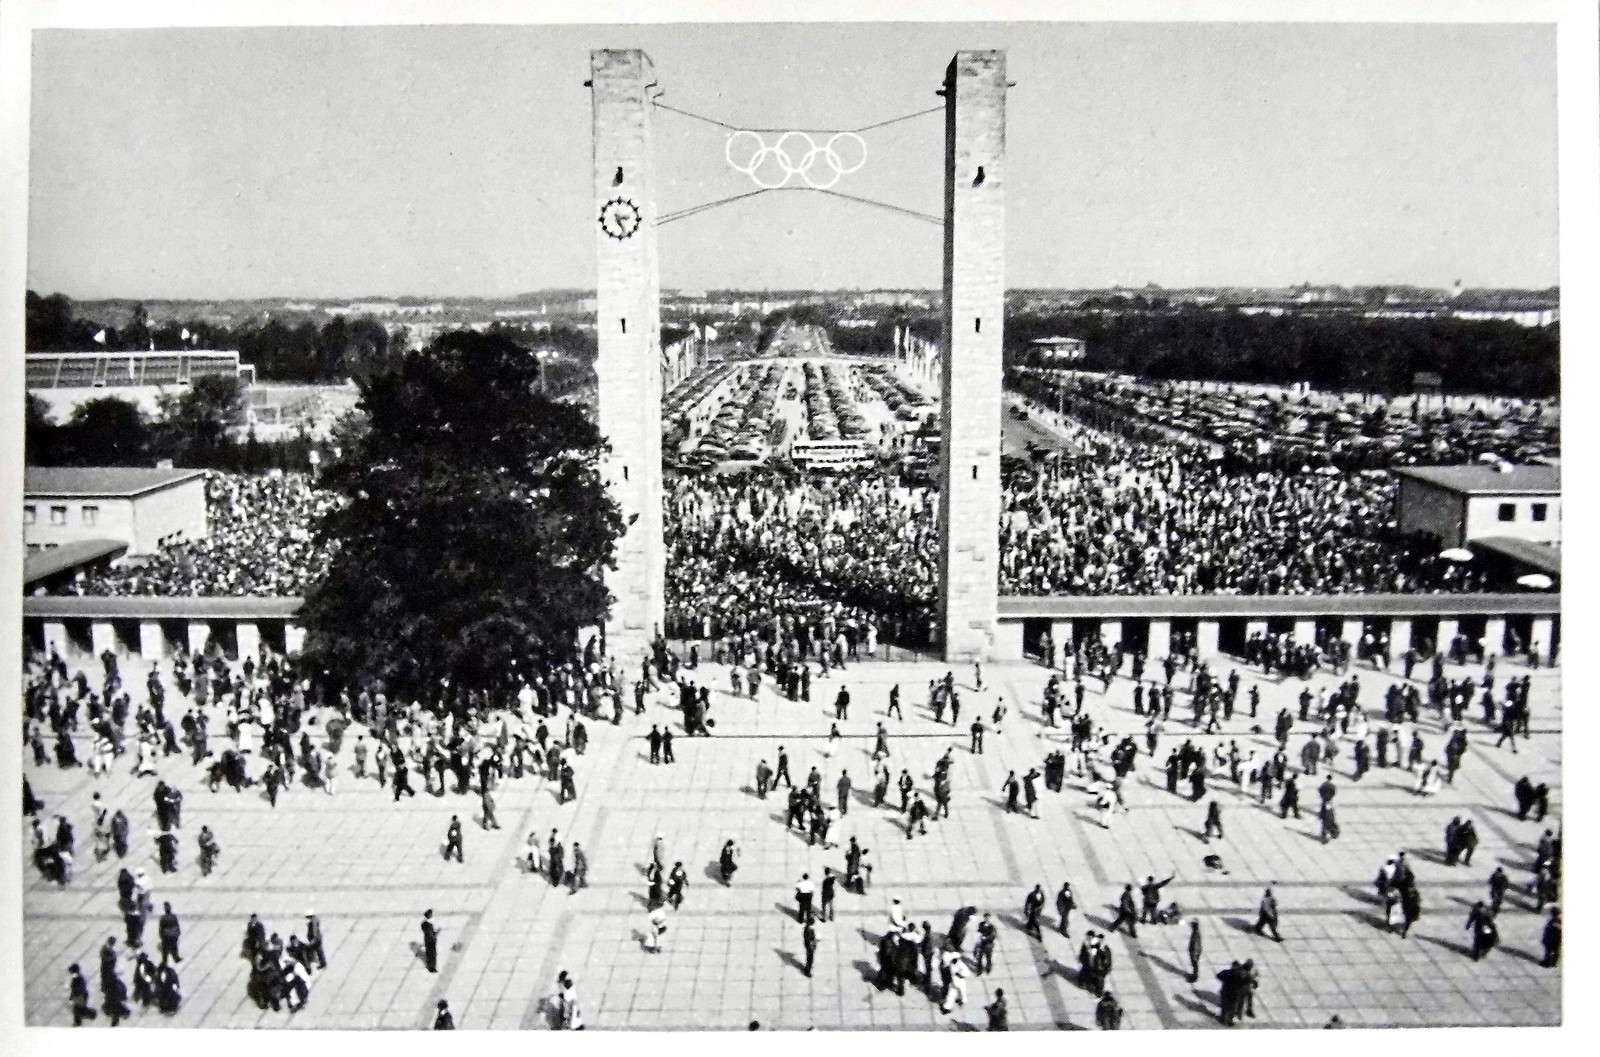 1936 Berlin Olympics Photograph - The East Gate of the Olympic Stadium on August 1, 1936, Awaiting the Arrival of the Fuhrer